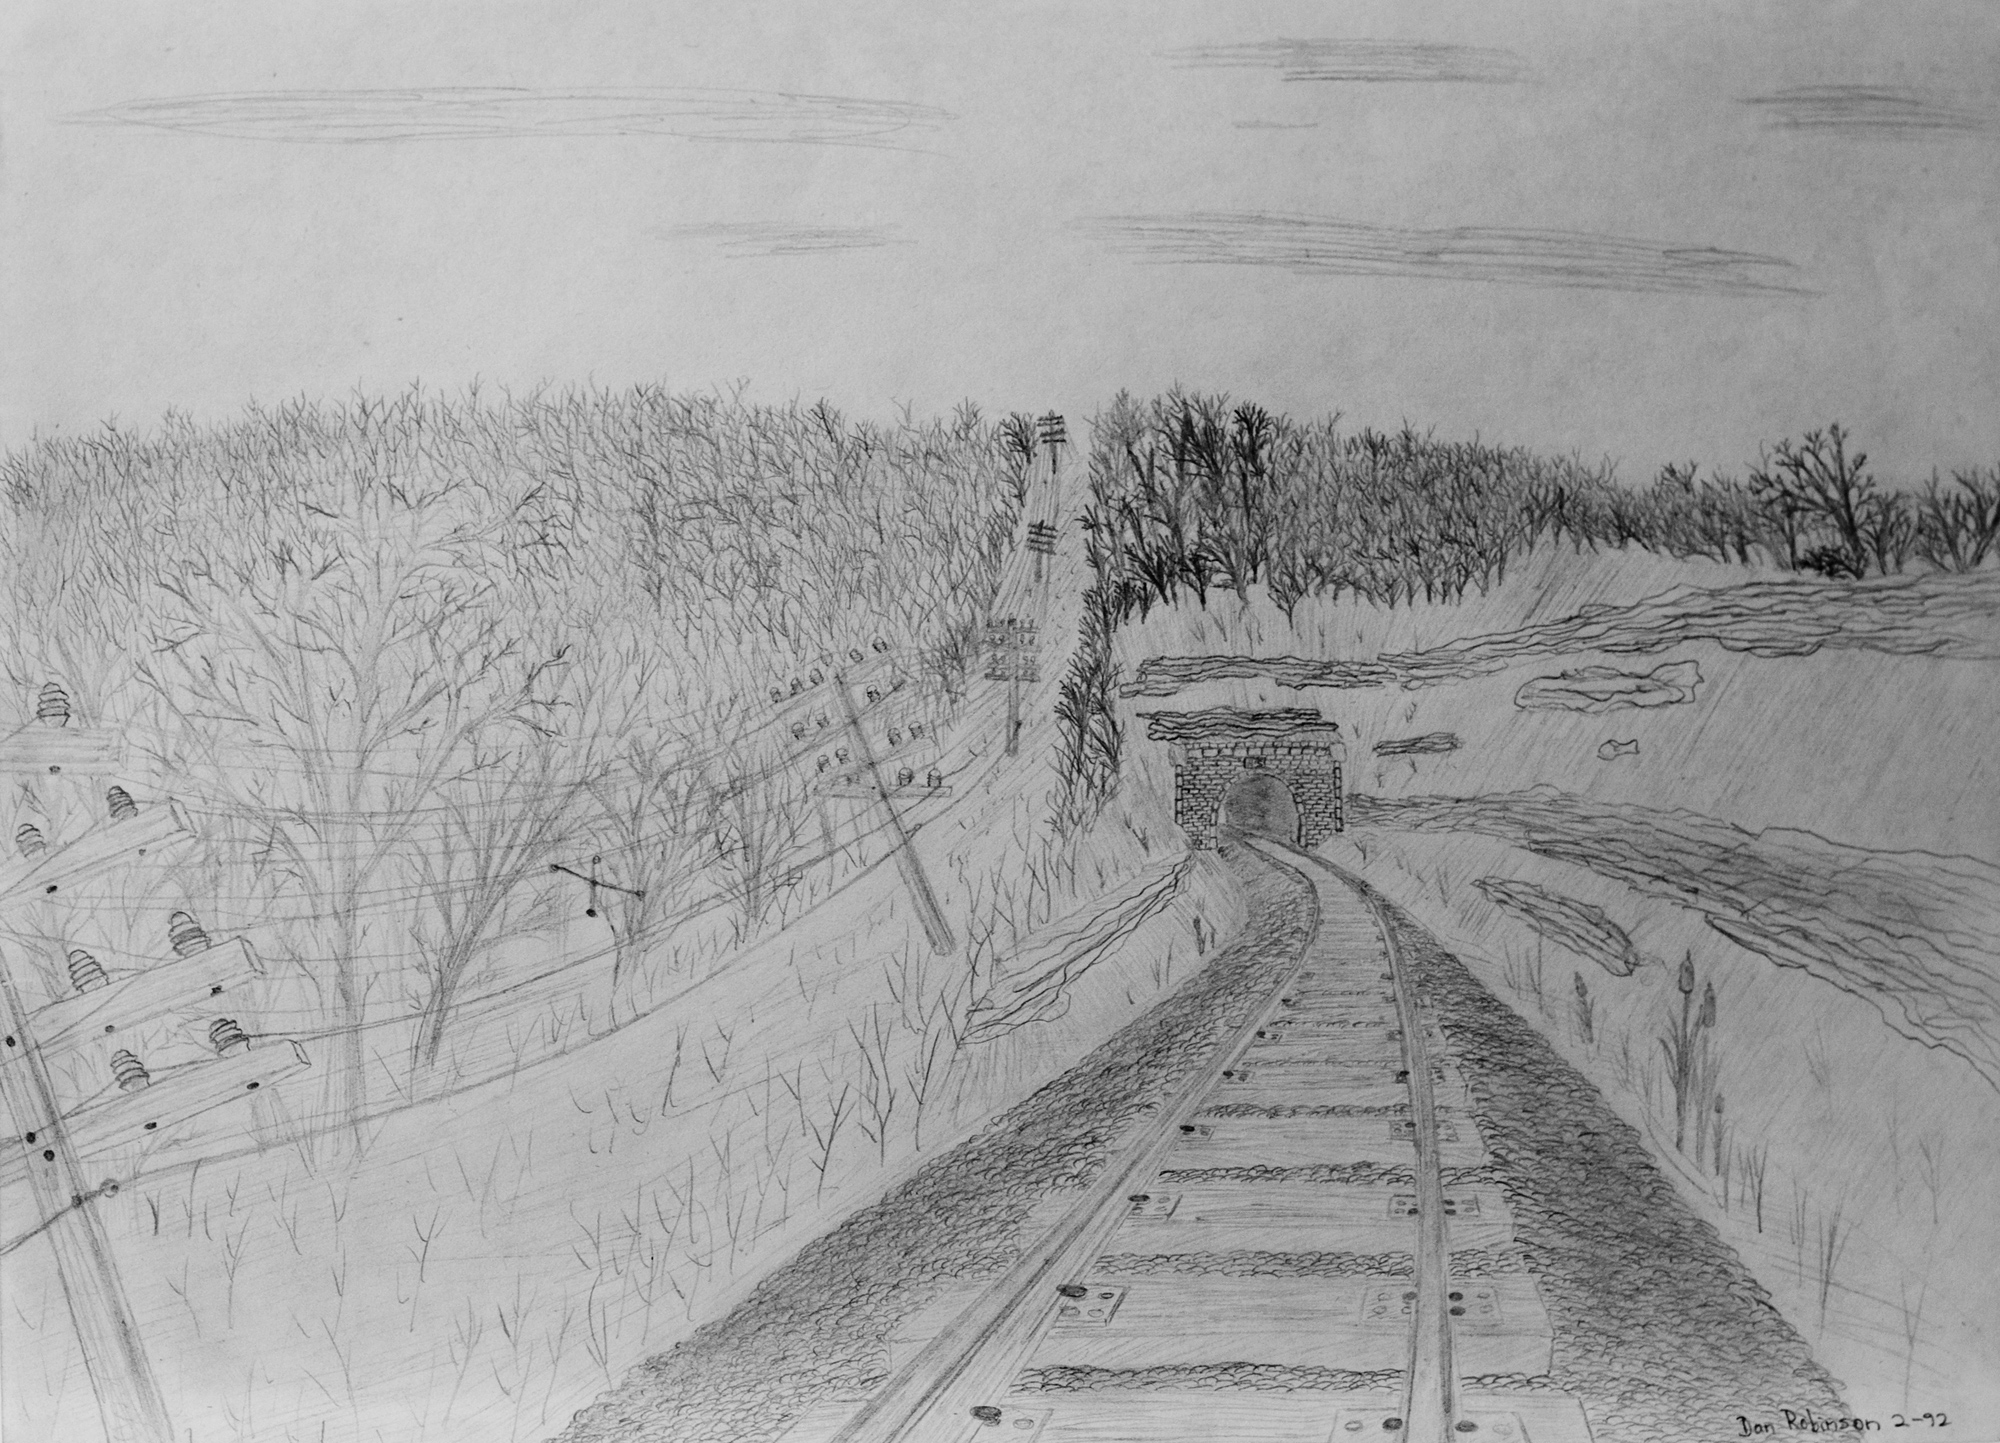 Tunnel No 5 on the old Baltimore and Ohio railroad near Claysville, PA pencil sketch